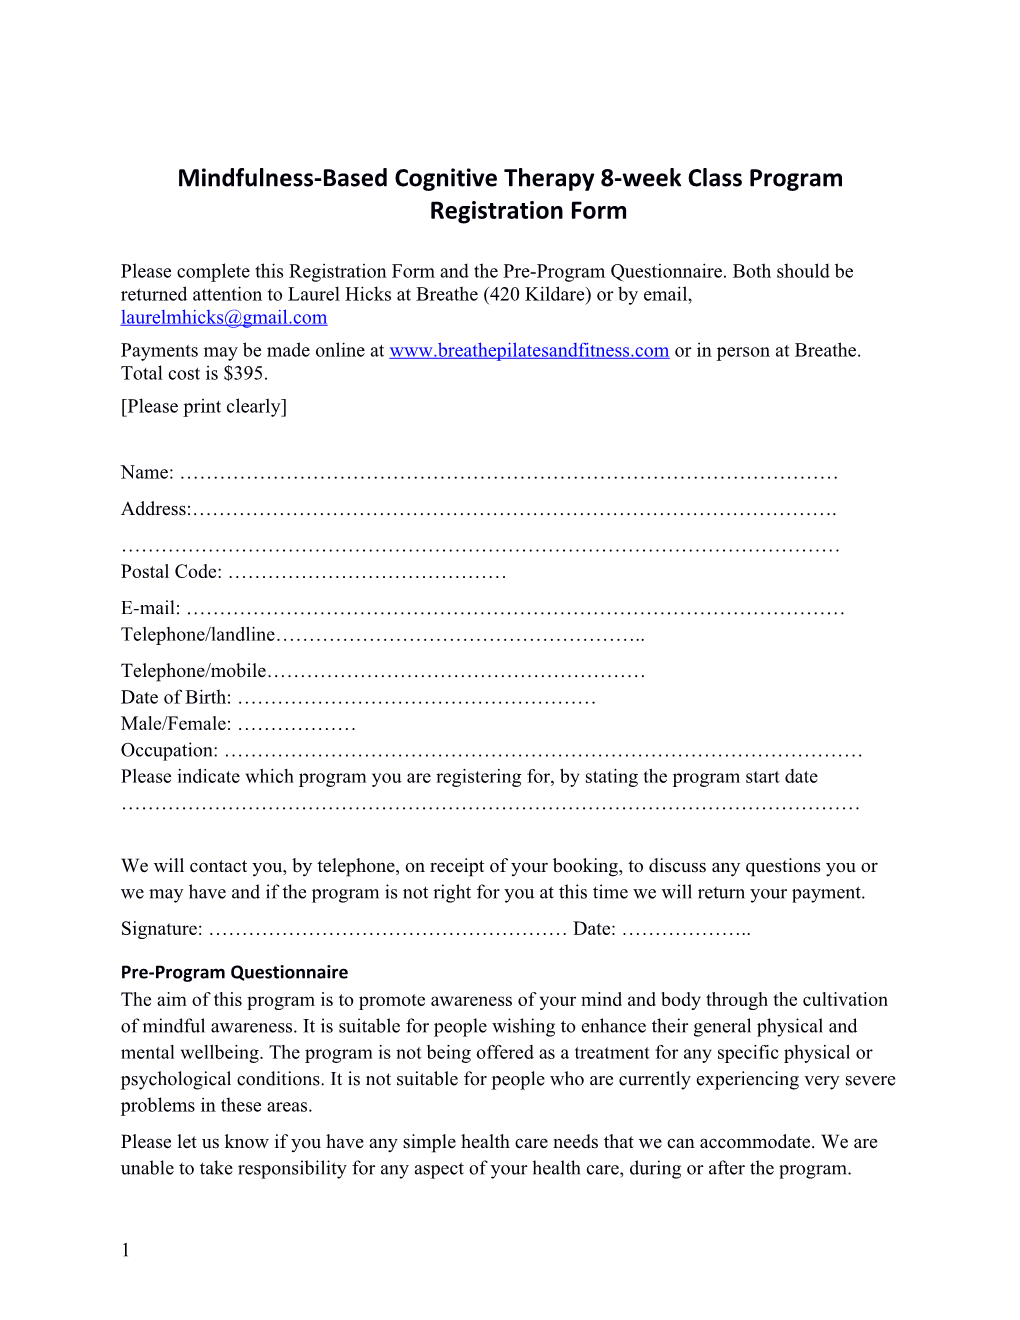 Mindfulness-Based Cognitive Therapy 8-Week Class Program Registration Form